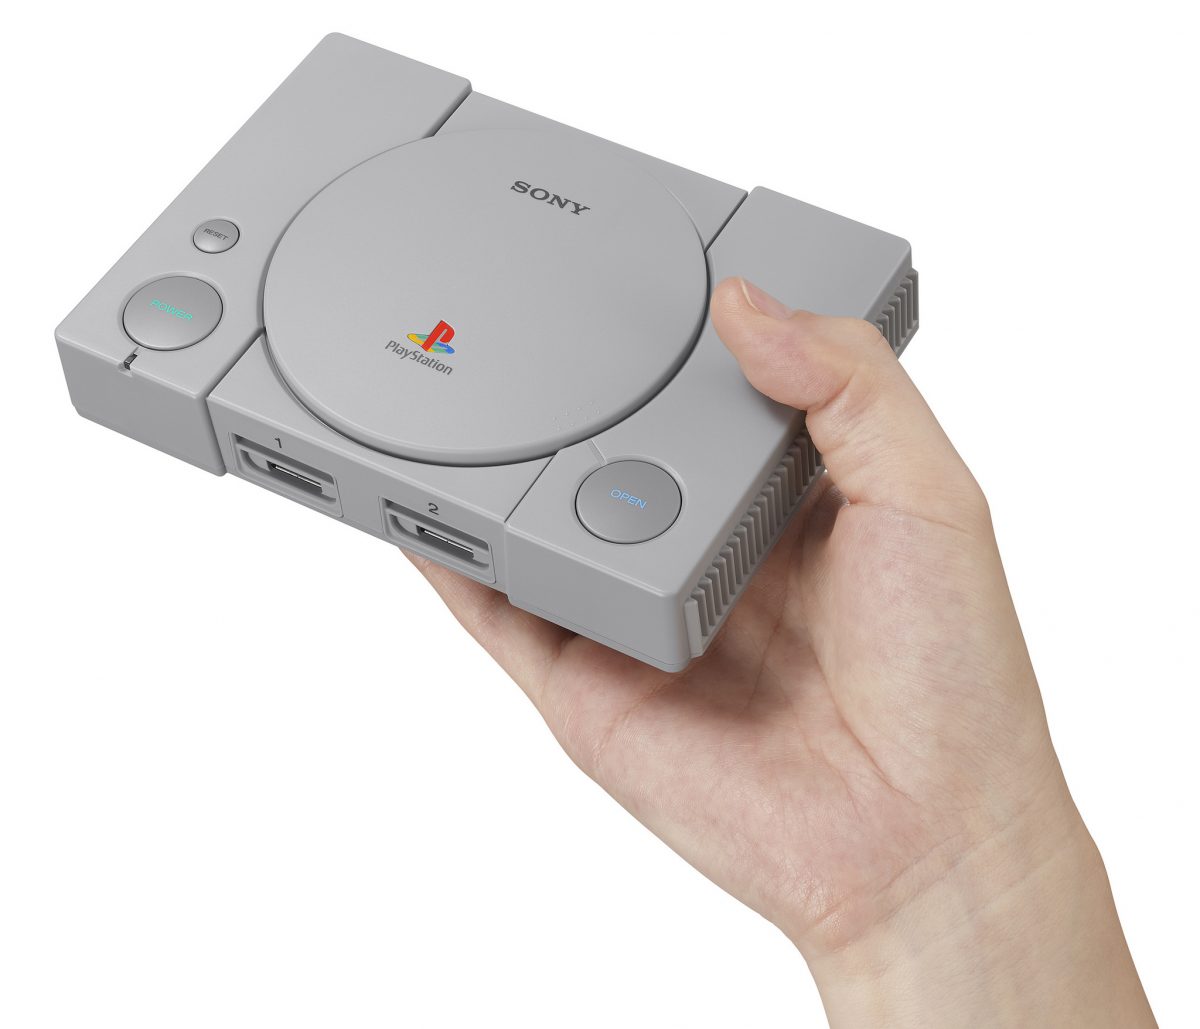 The full PlayStation Classic games list has been revealed